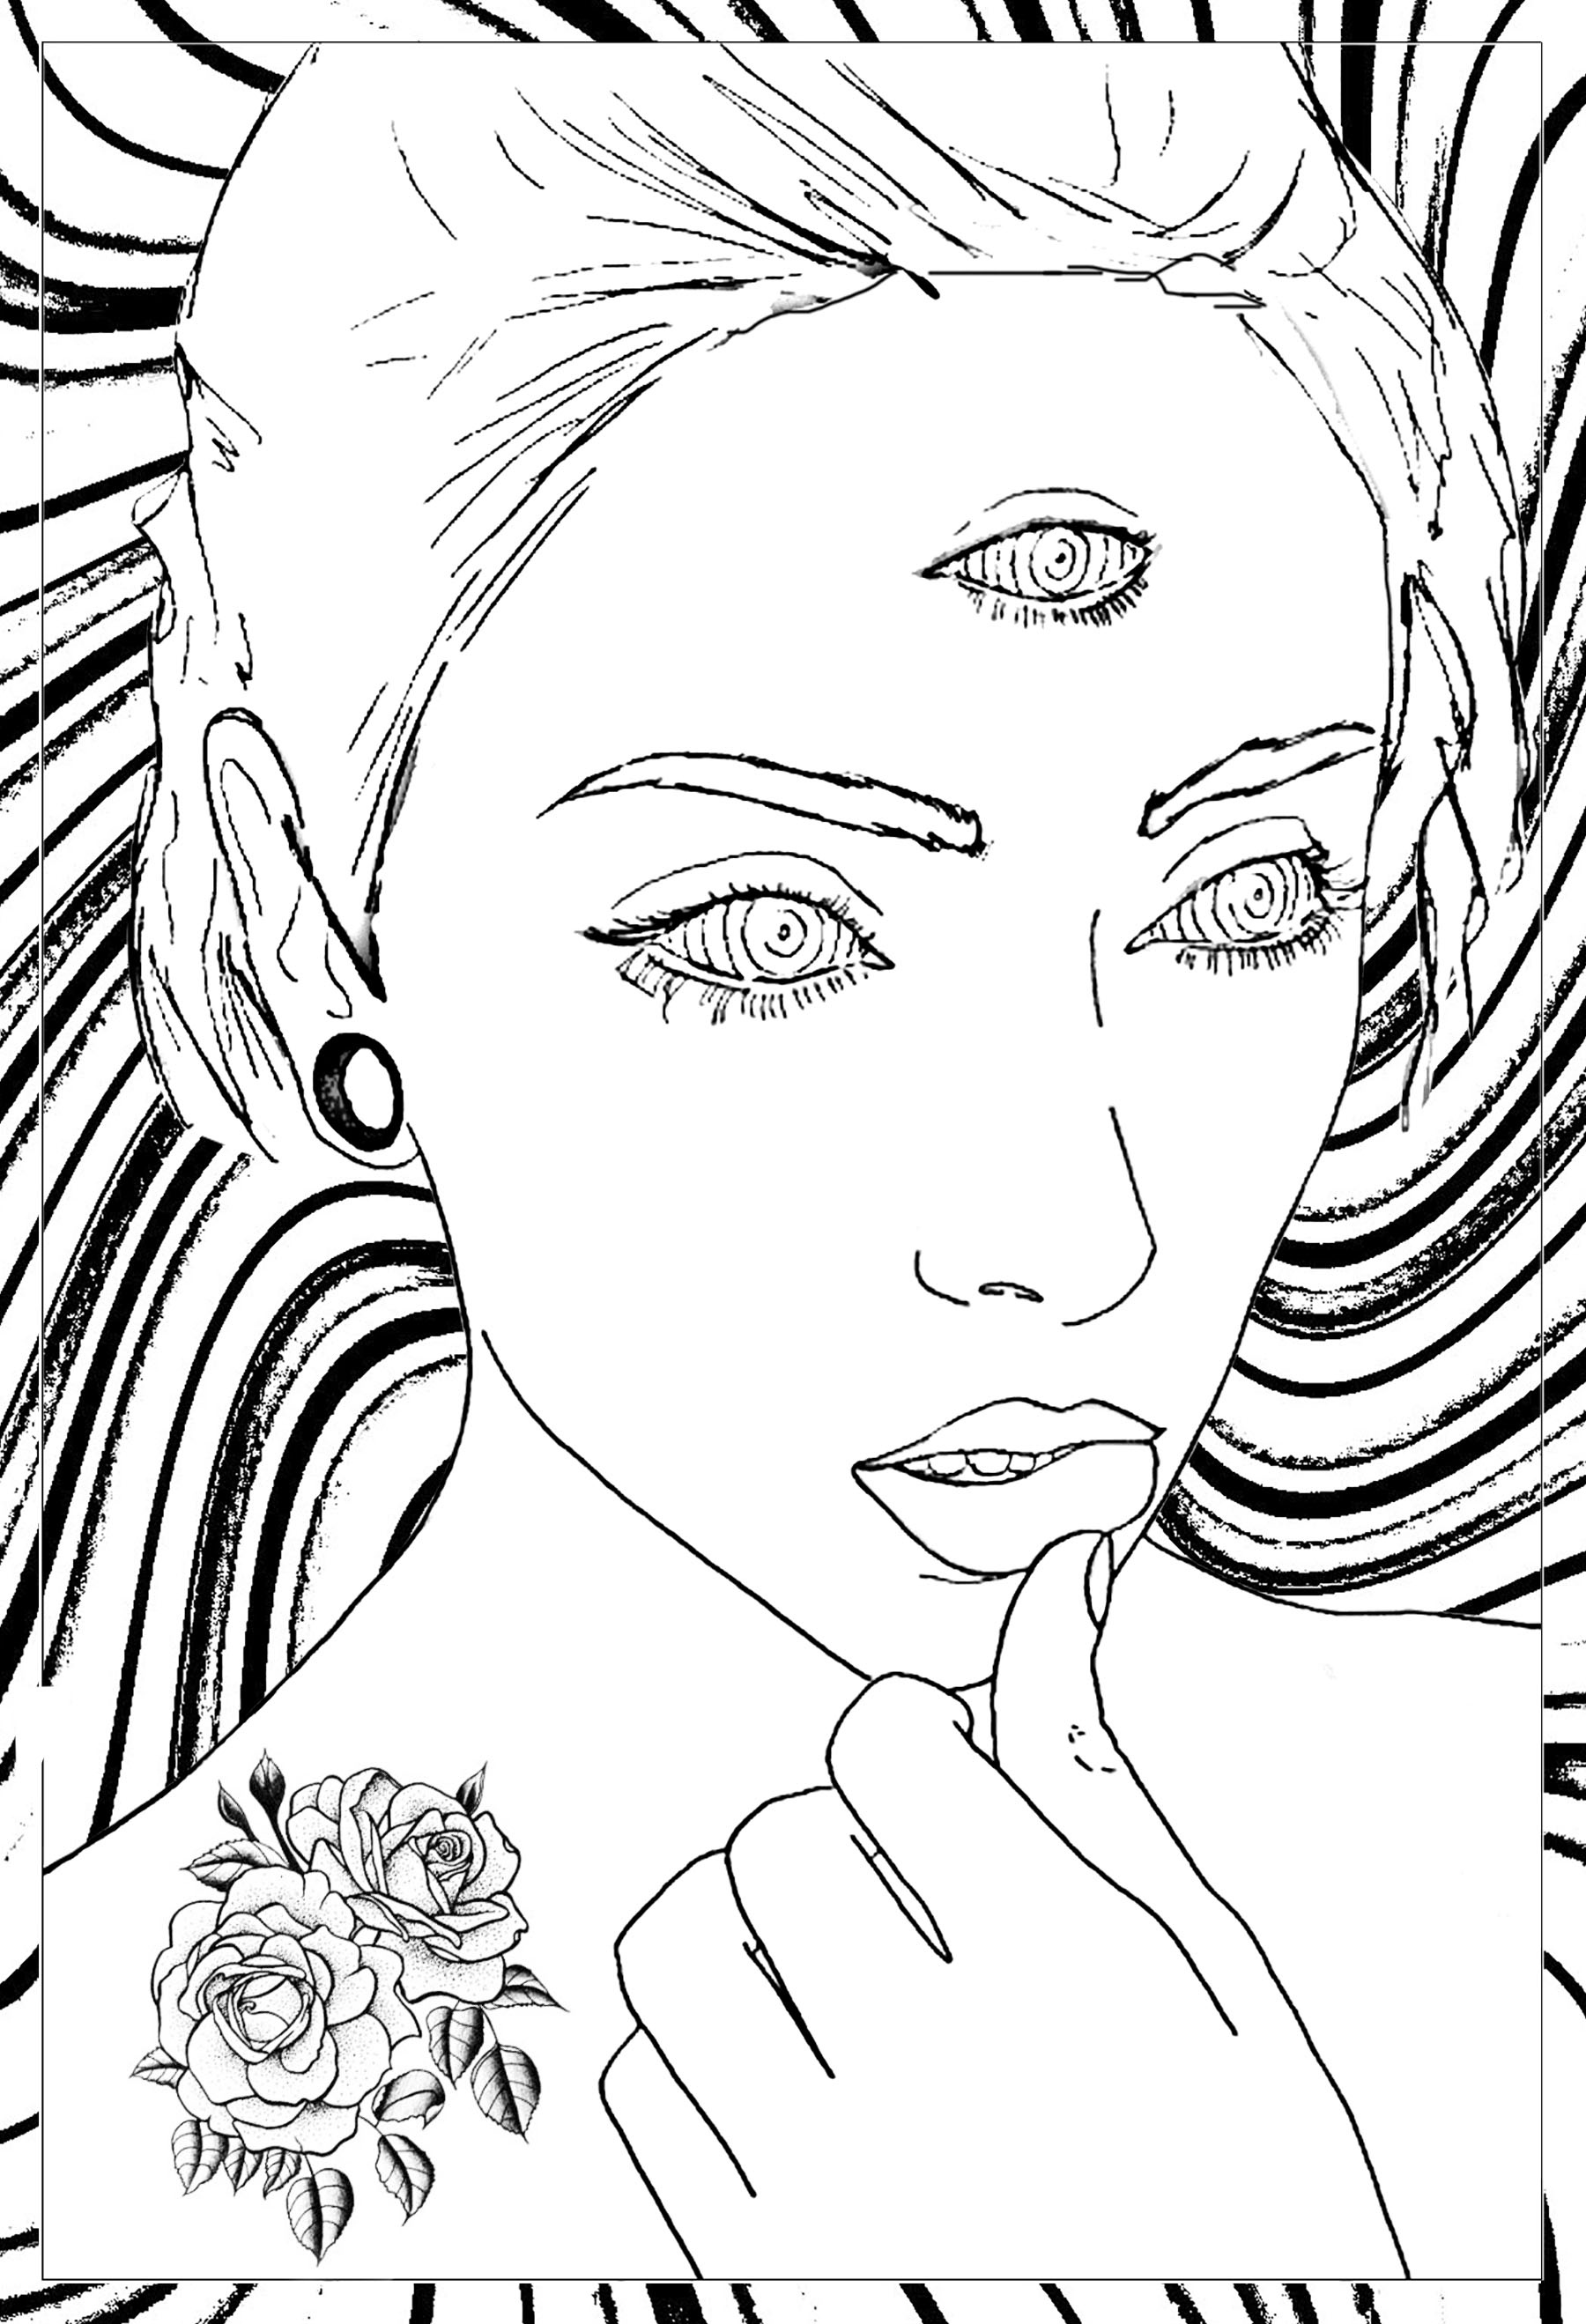 Awesome Coloring Pages For Adults At Getcolorings.com | Free Printable